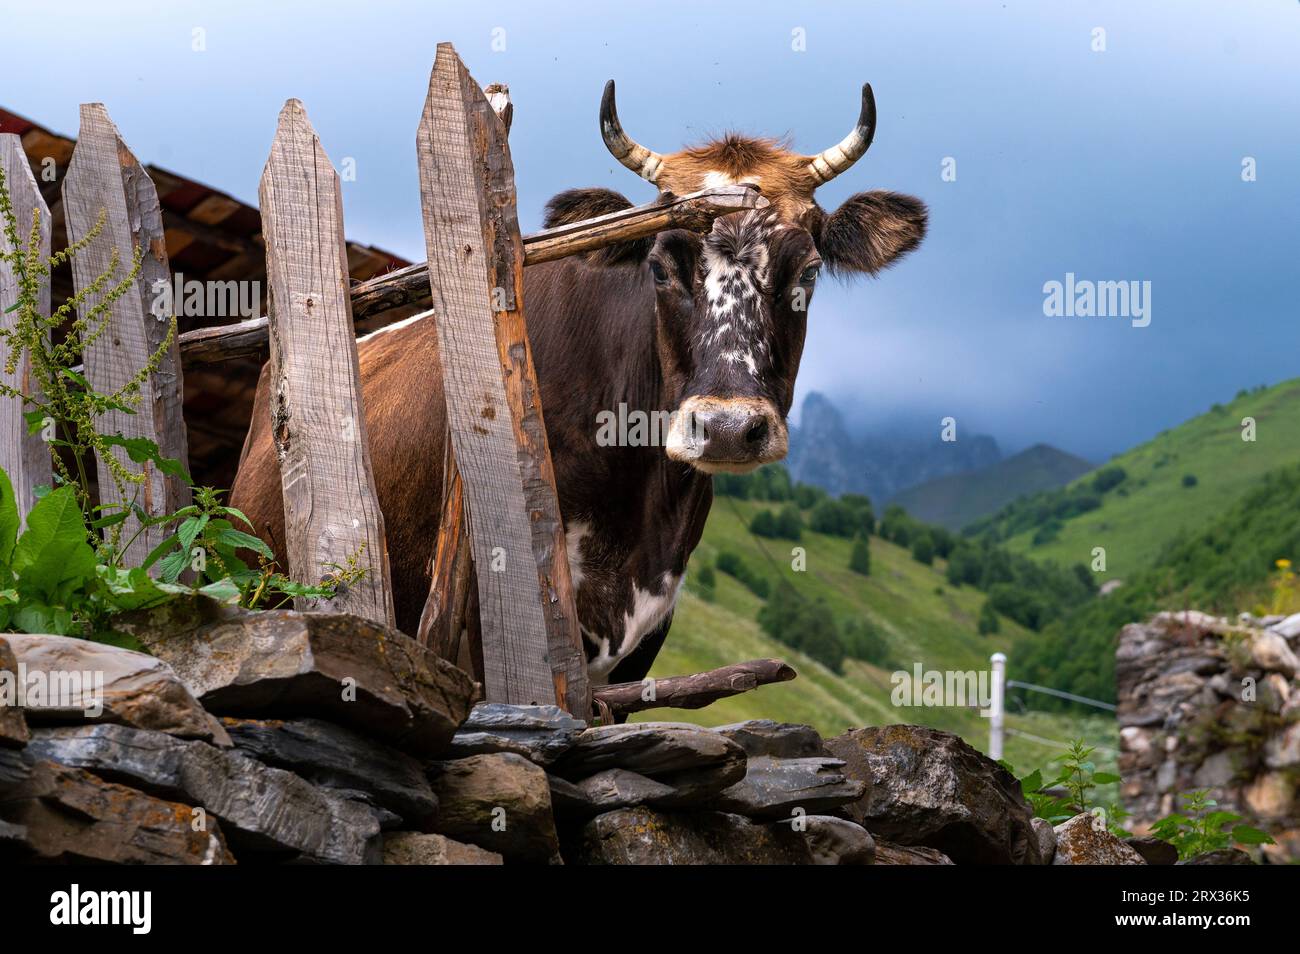 A local cow in a remote village nestled into the Caucasus mountains, Svaneti, Georgia, Central Asia, Asia Stock Photo